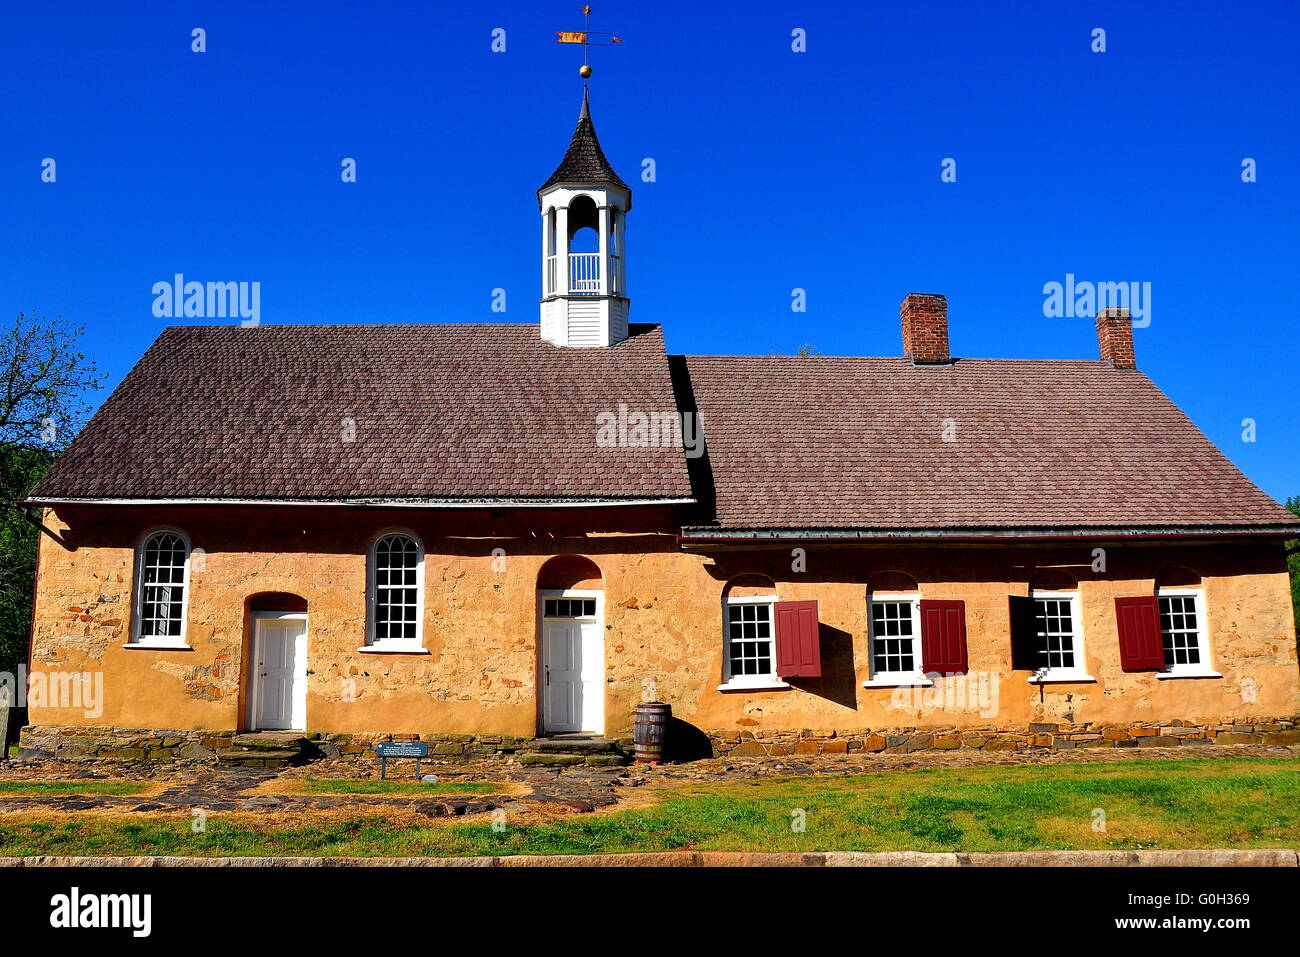 Bethabara, North Carolina:   1788 Gemeinhaus Moravian Church with attached minister's house at Bethabara historic settlement * Stock Photo